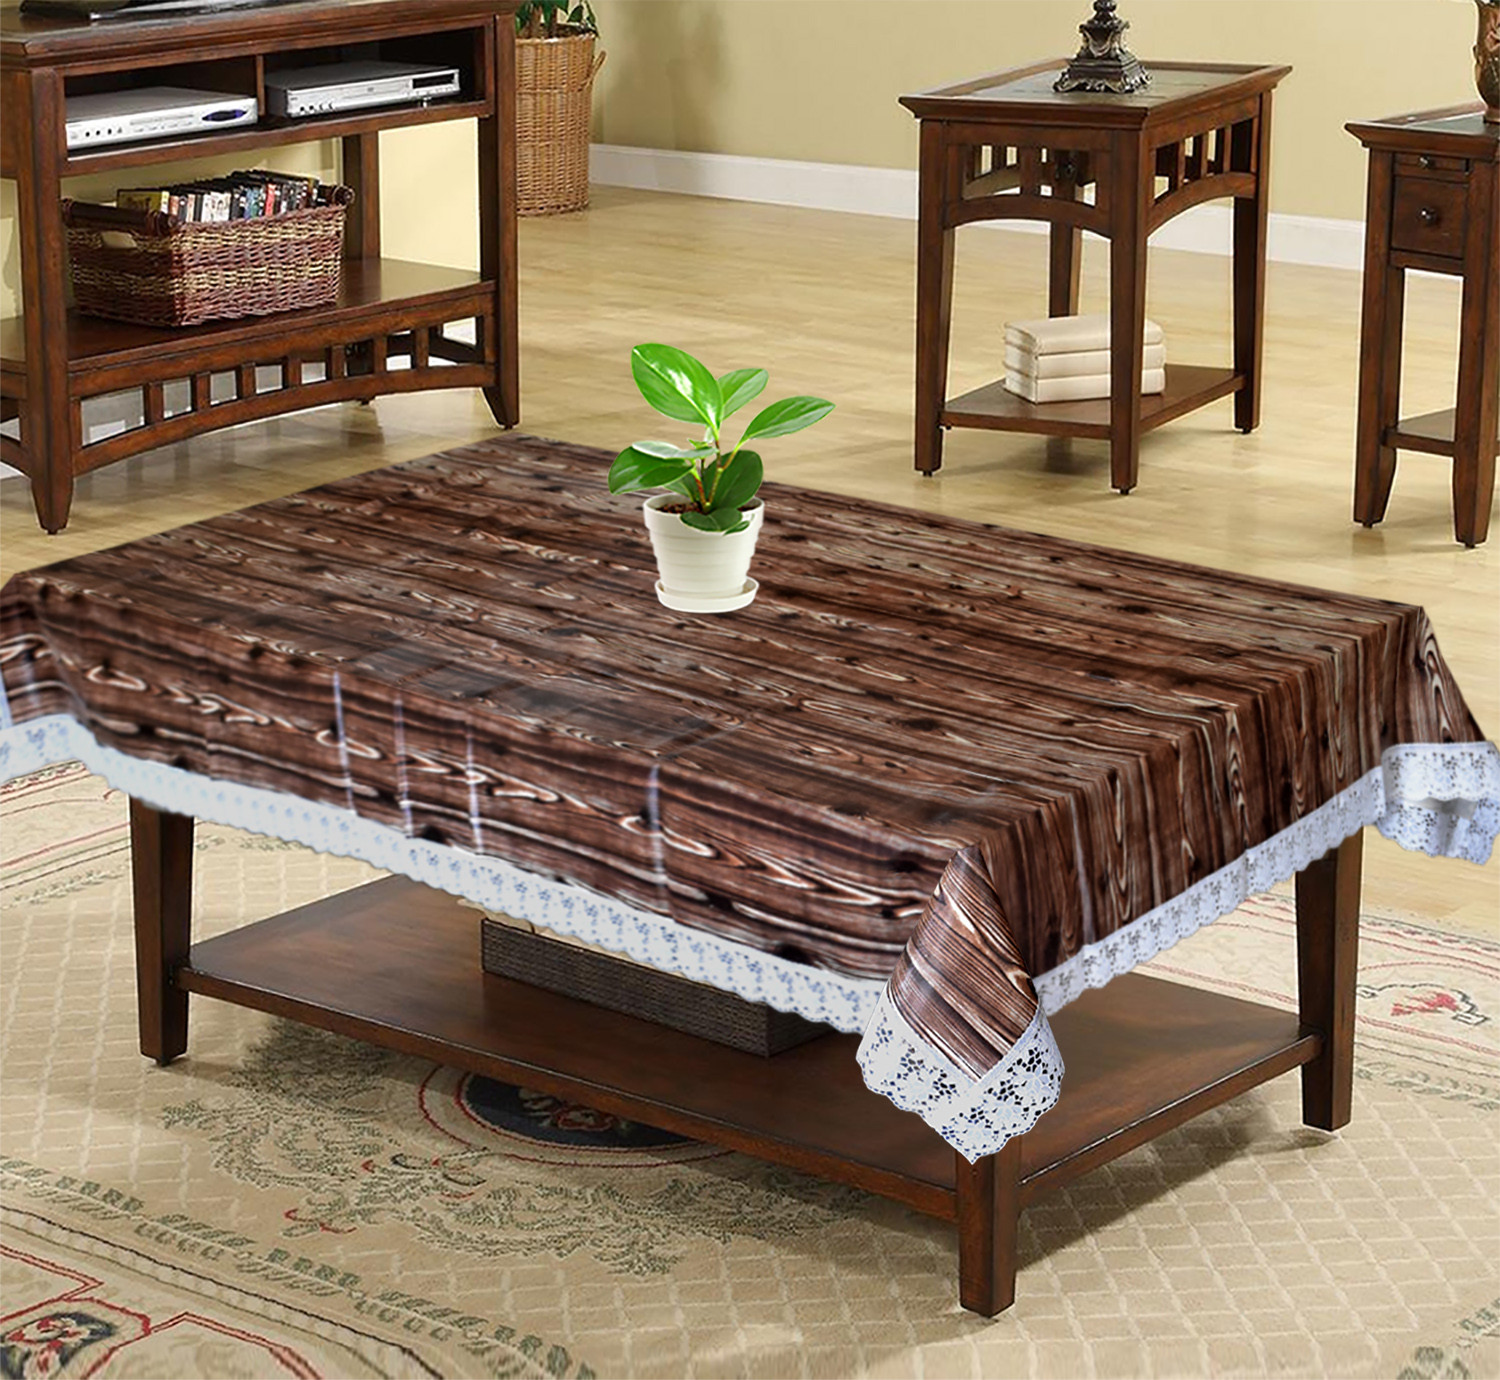 Kuber Industries Wooden Print PVC Center Table Cover/Table Cloth For Home Decorative Luxurious 4 Seater, 60